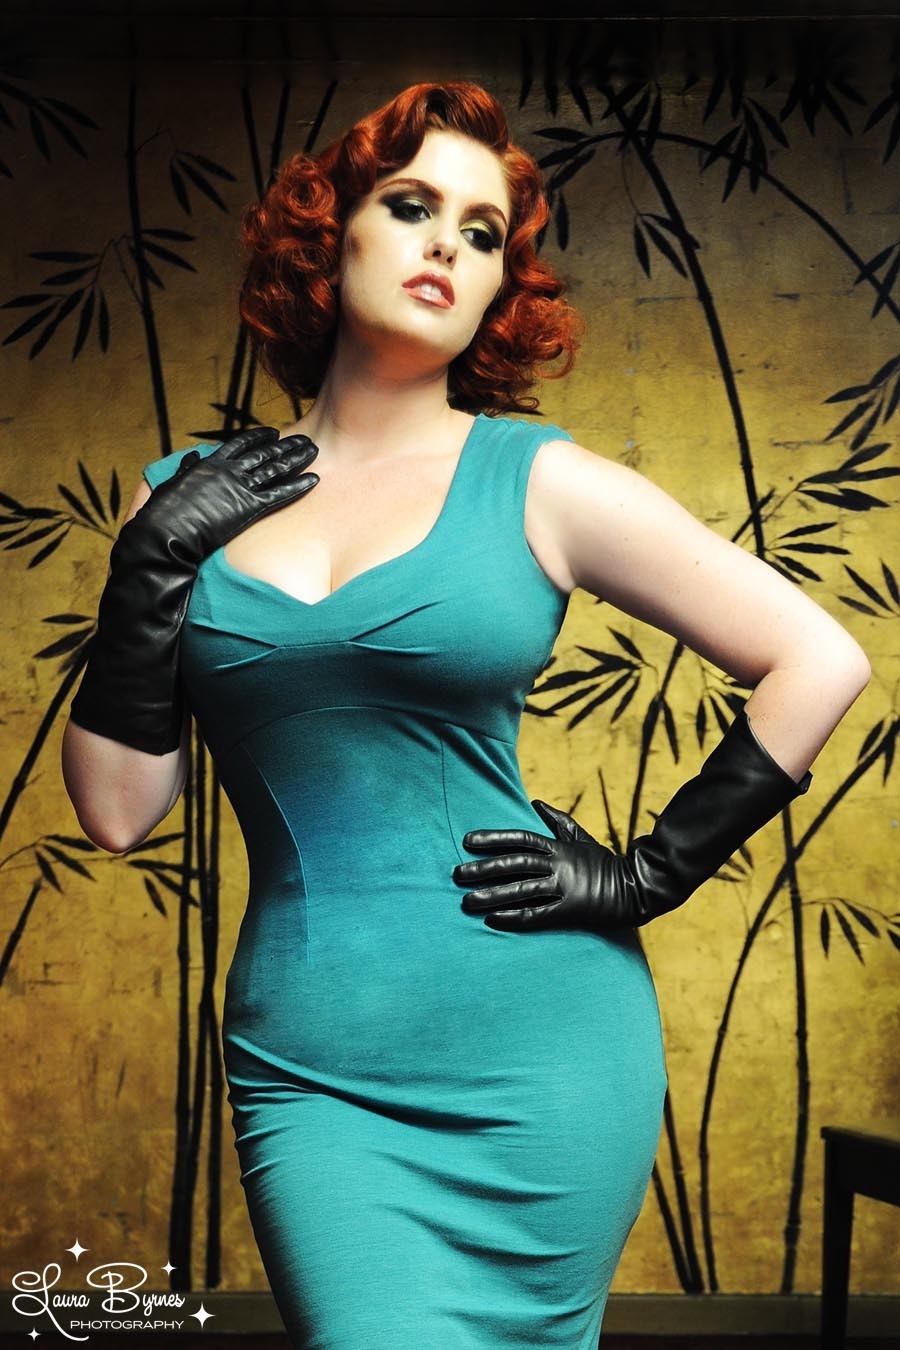 ms-curves:  One of two great pictures in the retro pin-up style of women with bright